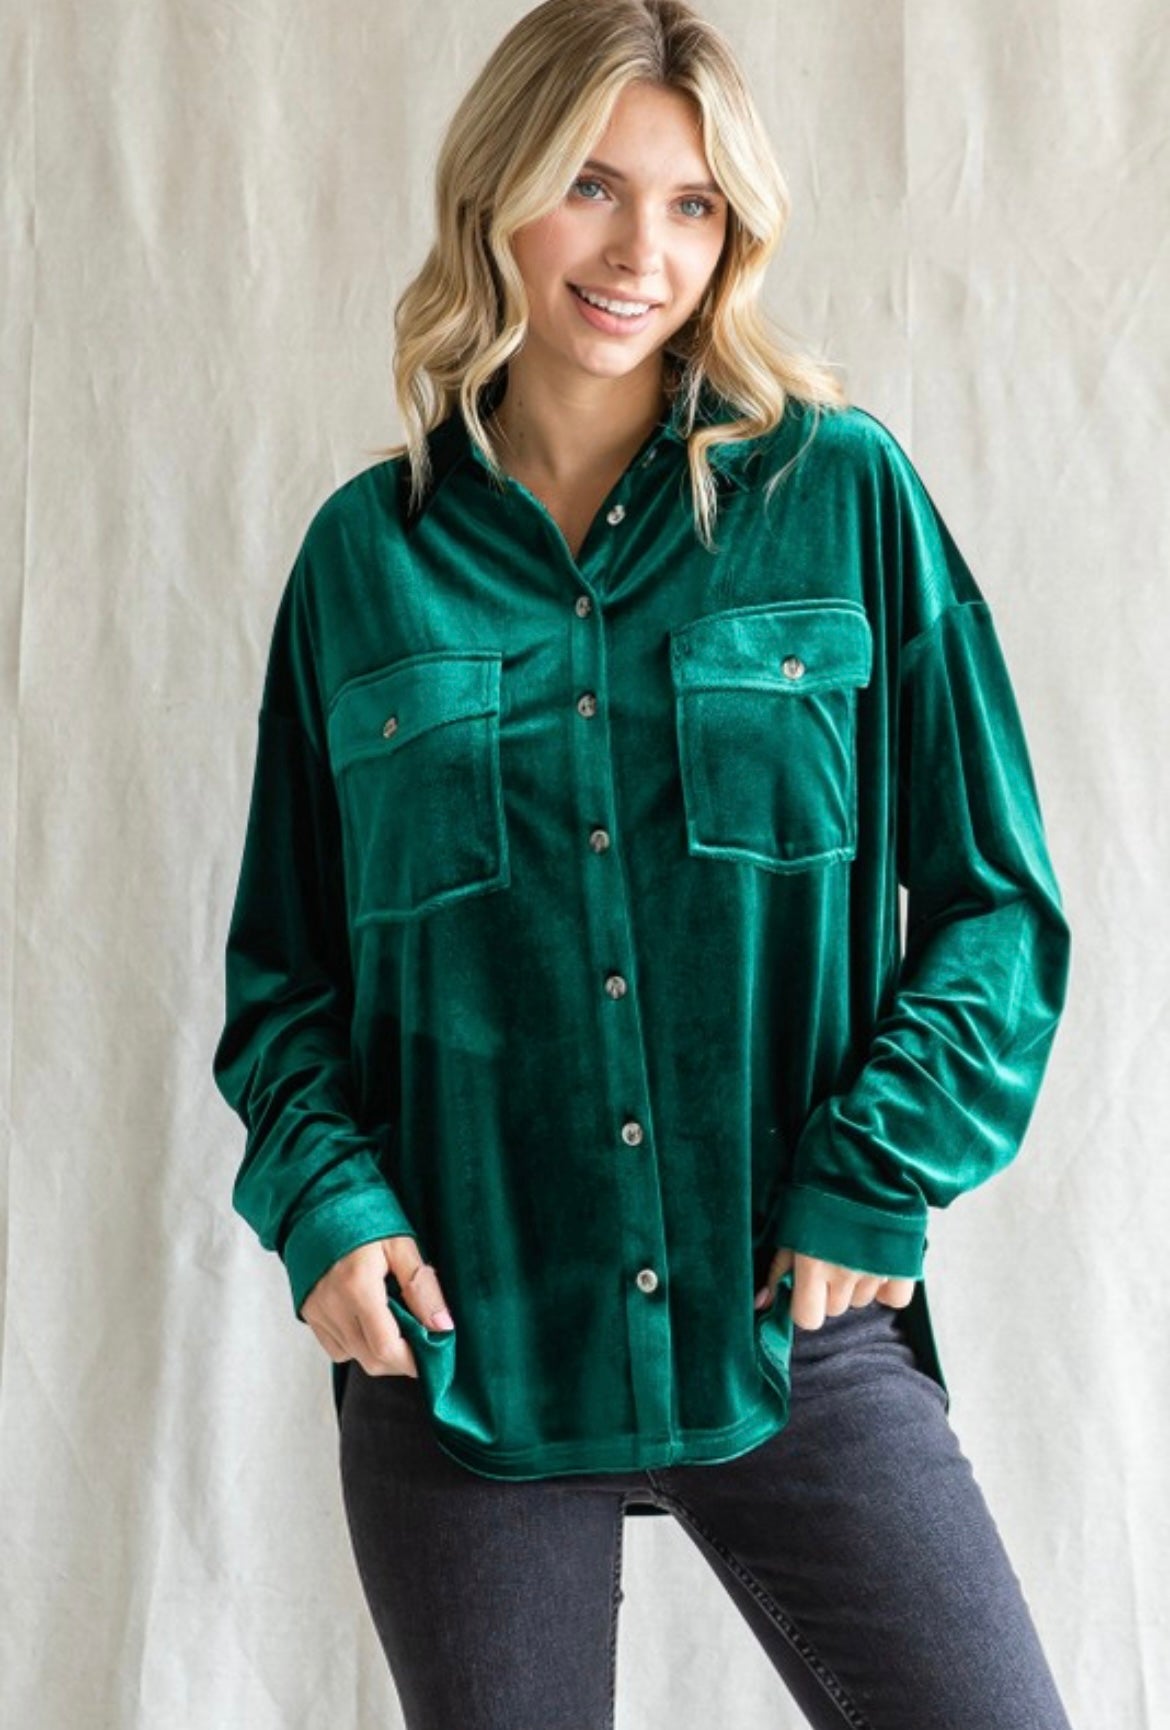 Plus Perfect For You Velvet Green Top